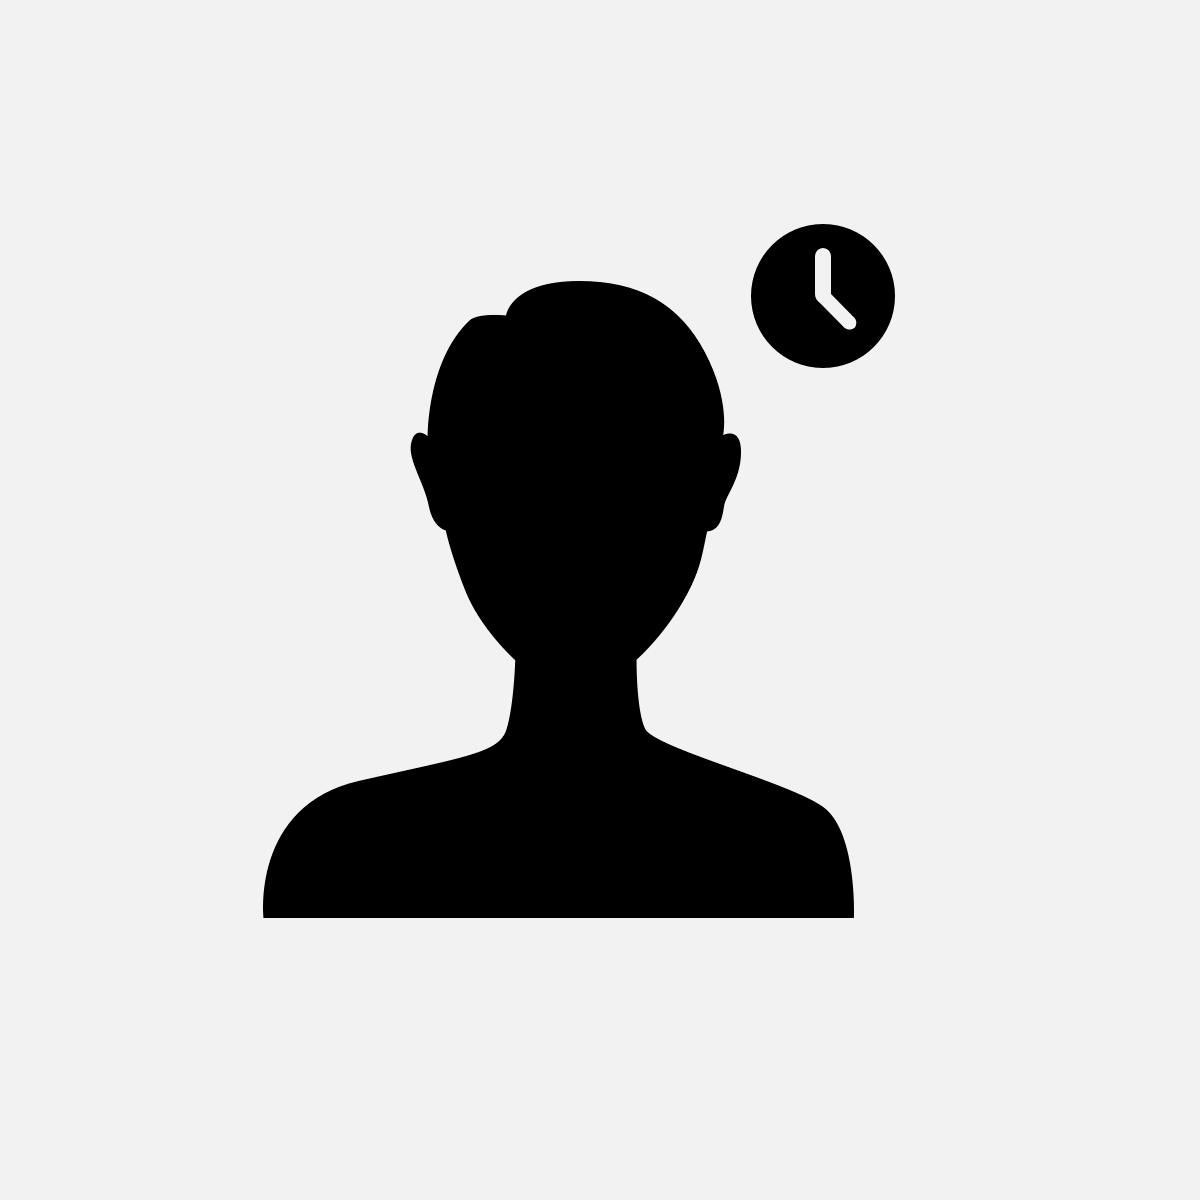 Silhouette of a person in front of a clock